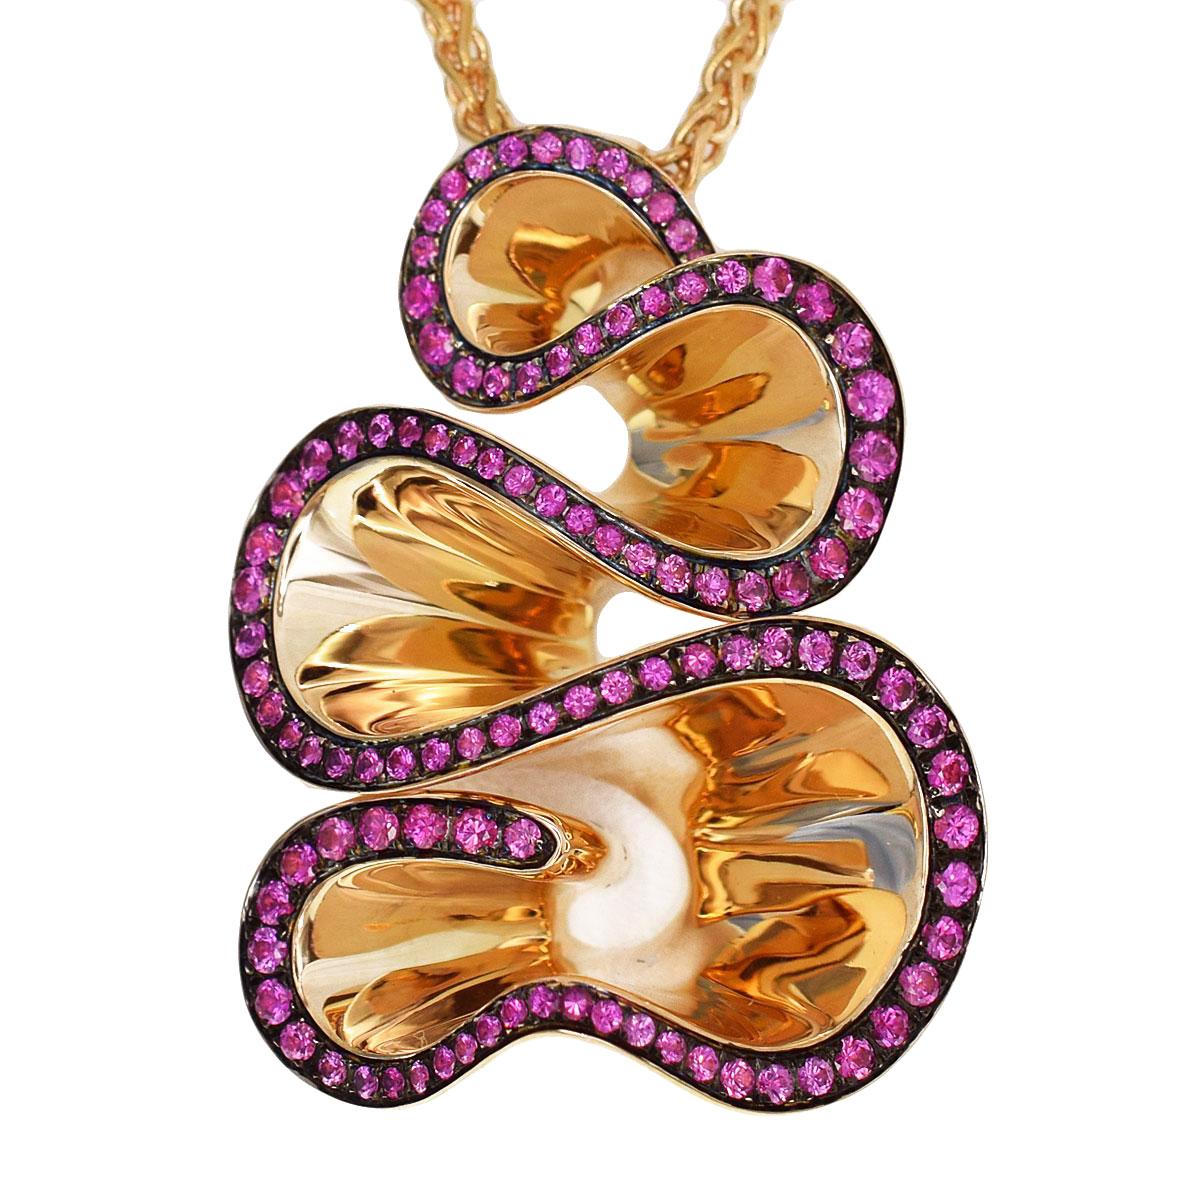 A magnificent De grisogono necklace from the Zigana collection showcasing pink sapphires perfectly set in 18 rose gold. The pendant measures 1.57